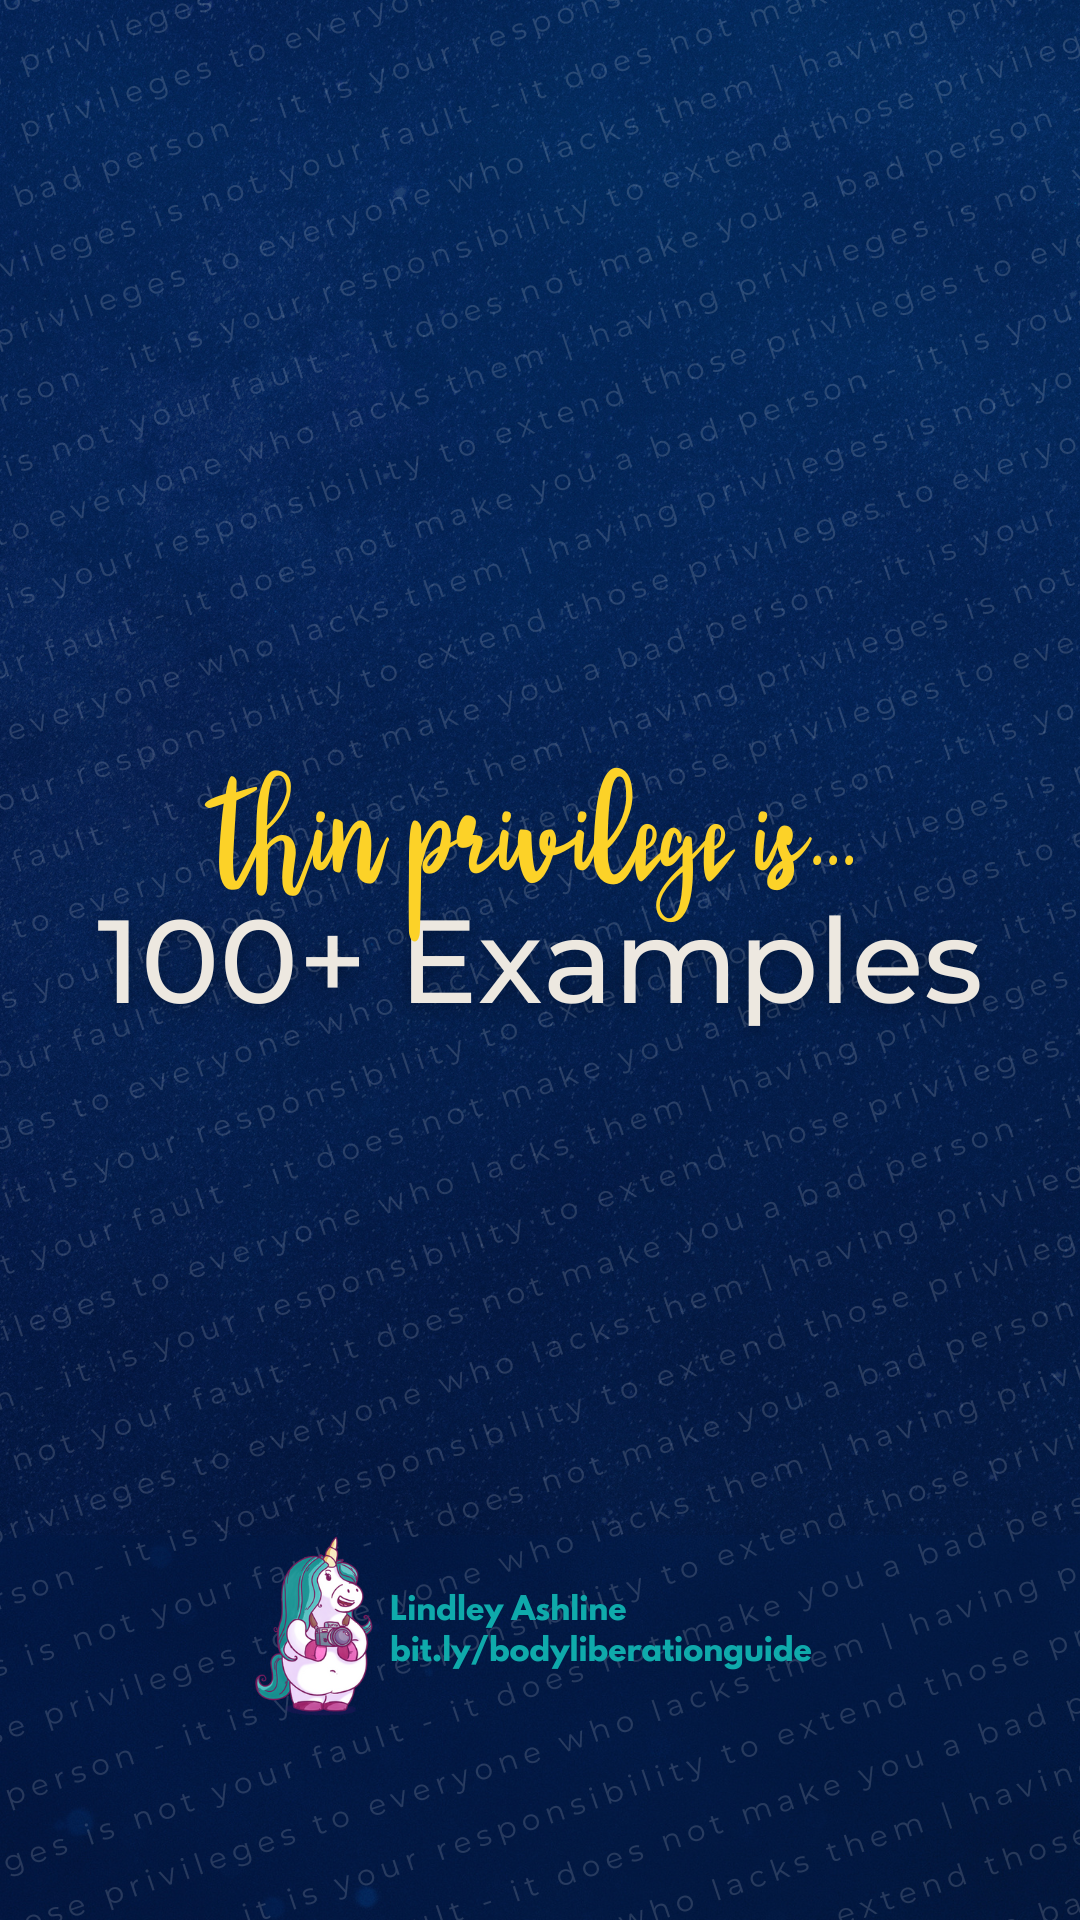 A dark blue background with this text faintly overlaid: "having privileges is not your fault - it does not make you a bad person - it is your responsibility to extend those privileges to everyone who lacks them." Layered on this is the title of the post plus Lindley's logo